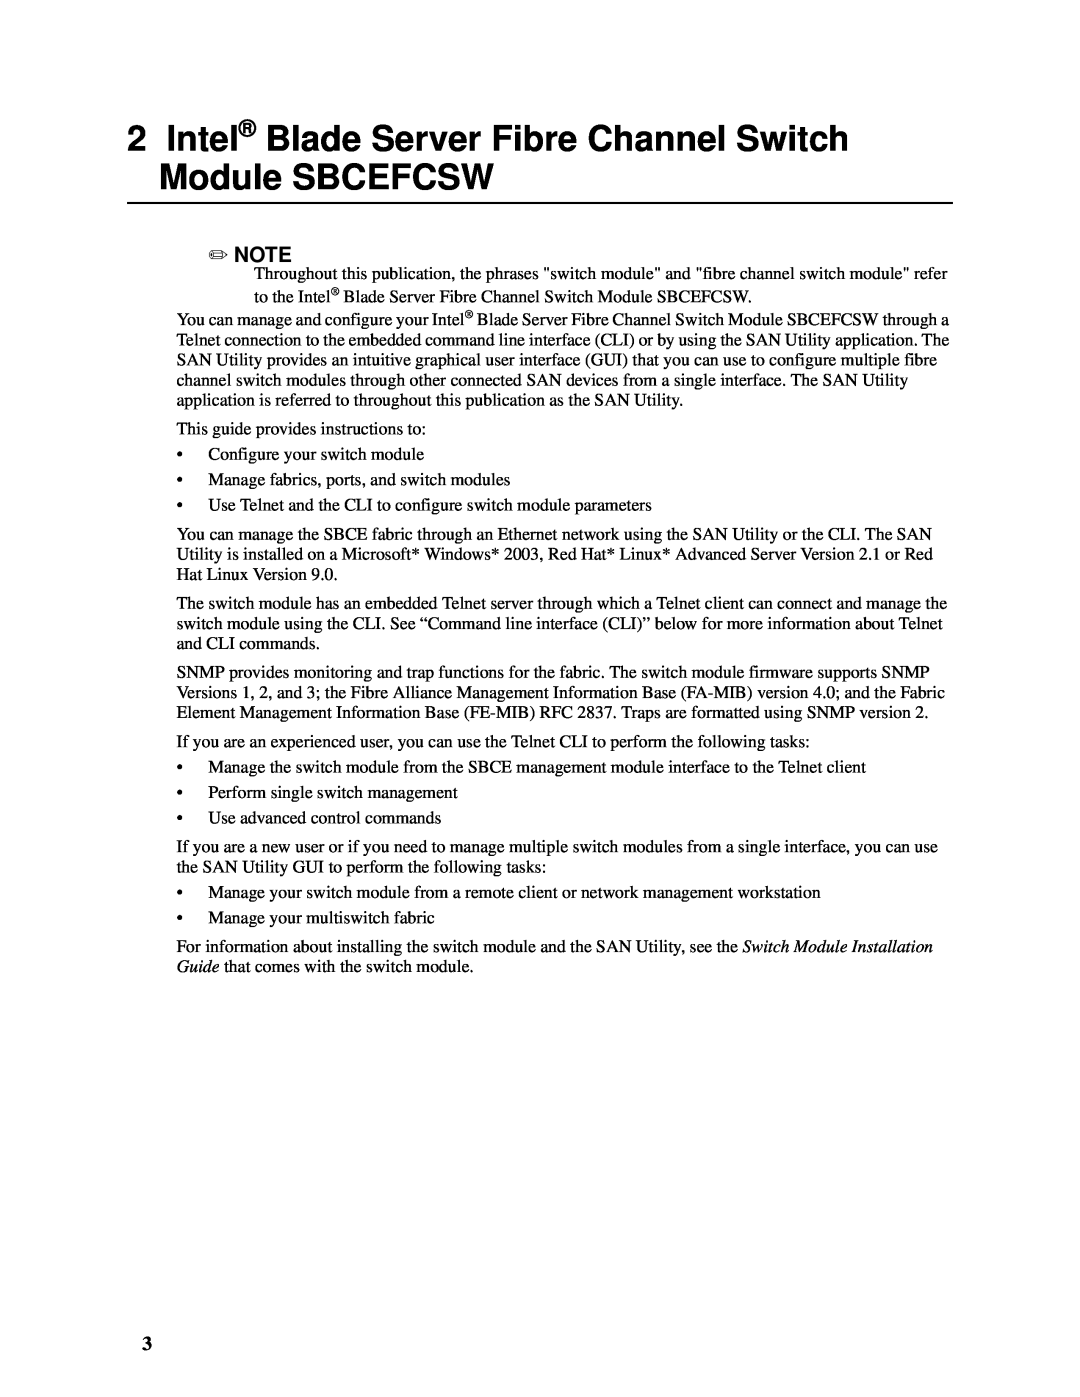 Intel SBCEFCSW, SBFCM manual This guide provides instructions to 